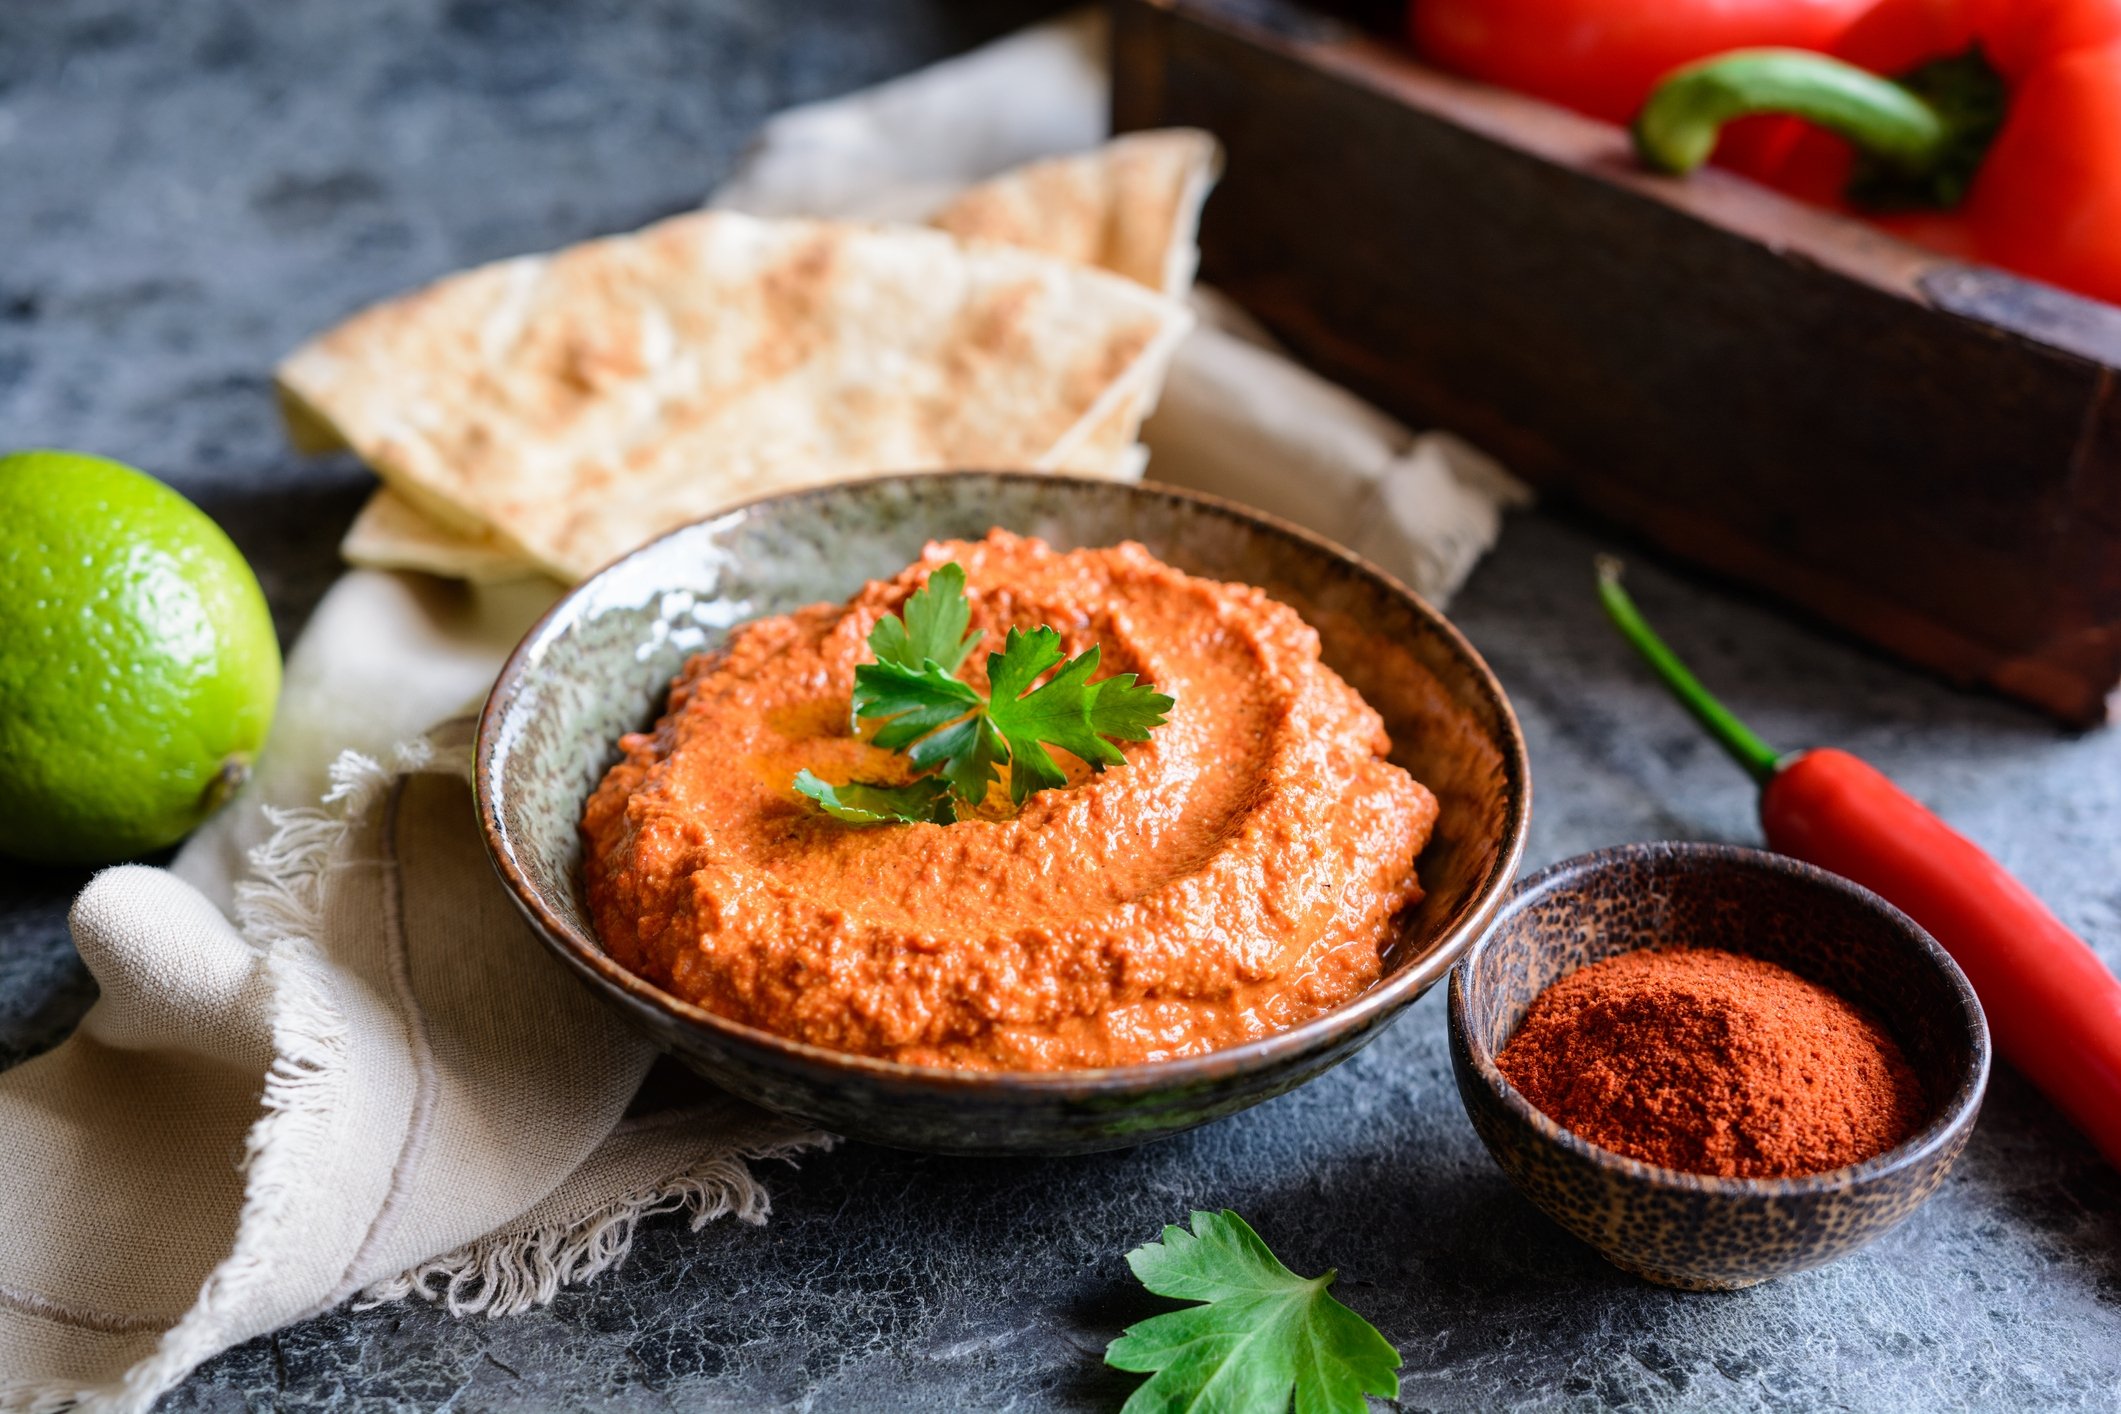 Muhammara, a walnut and roasted red bell pepper dip. (iStock Photo)